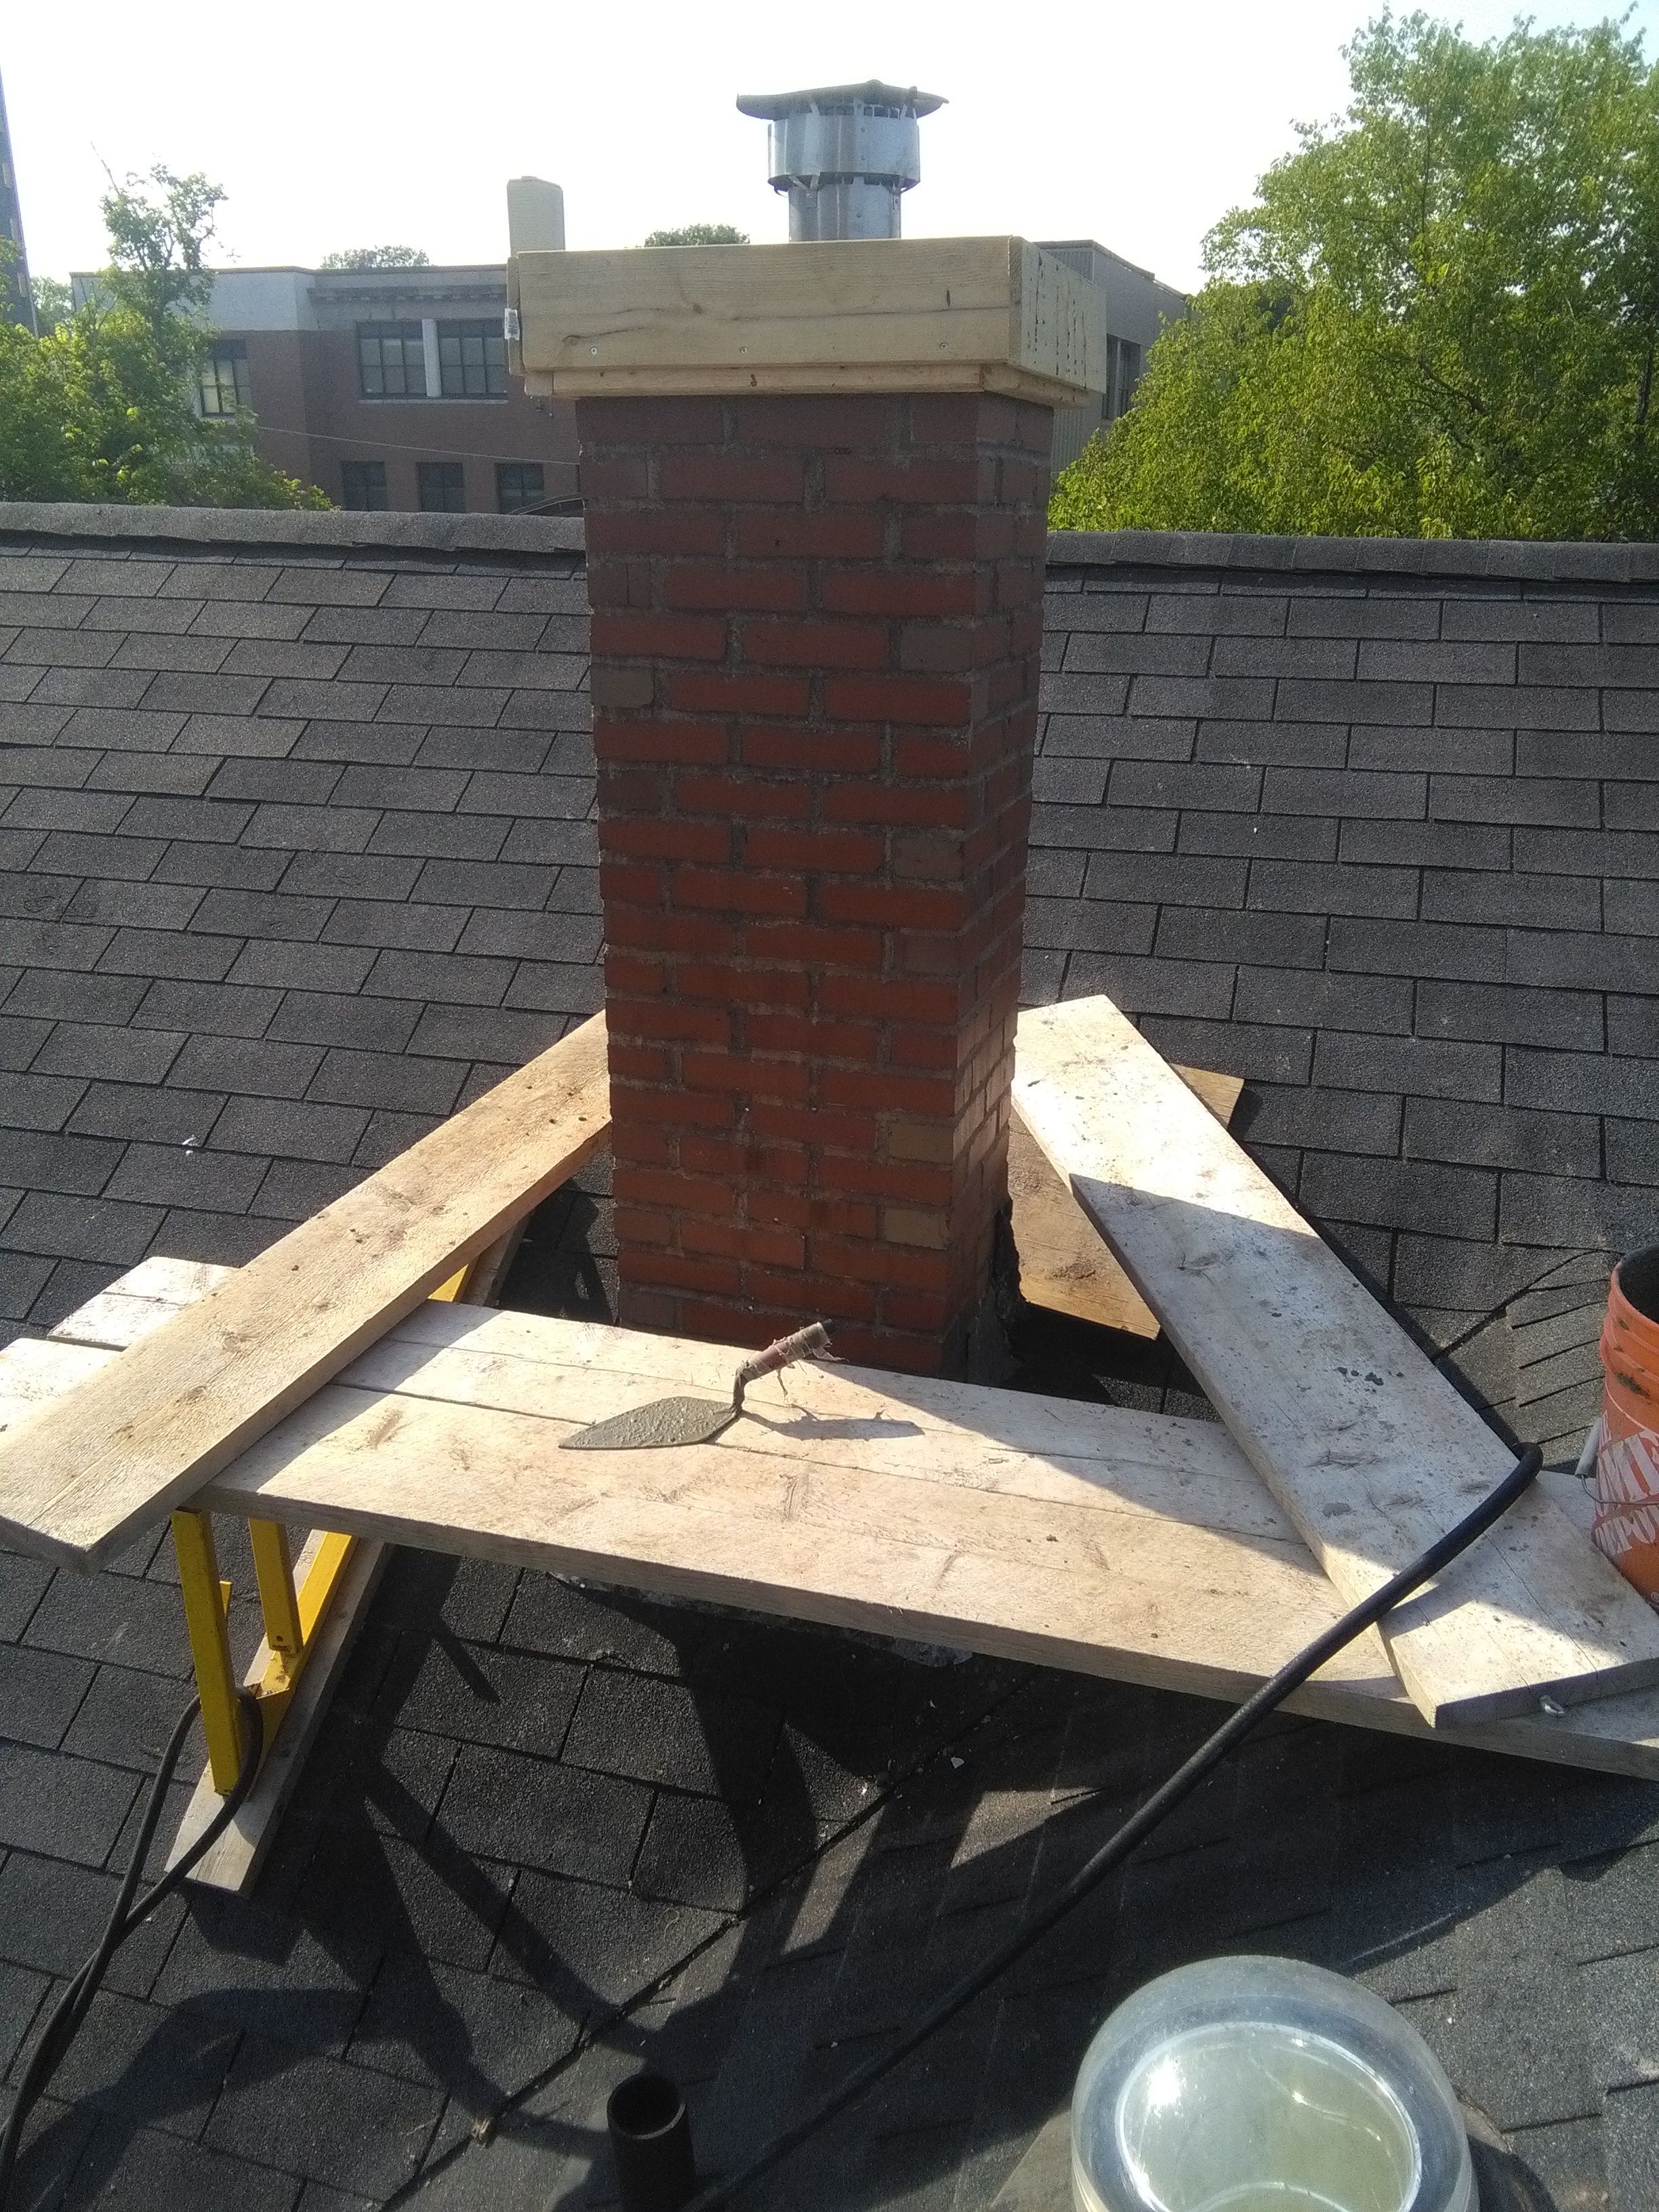 image of chimney liner-chimney liner installation services completed in Halifax-Dartmouth Regional Municipality NS by Pro Chimney Services based in Halifax, NS servicing all of the Halifax-Dartmouth Regional Municipality, Bedford, Sackville, Mount Uniacke, Windsor, Hantsport , Wolfville, Kentville, Chester, Mahone Bay, Lunenburg, Bridgewater, Liverpool, Fall River, Wellington, Enfield, Elmsdale, Brookfield, Truro, Musquodoboit Harbour & surrounding areas.